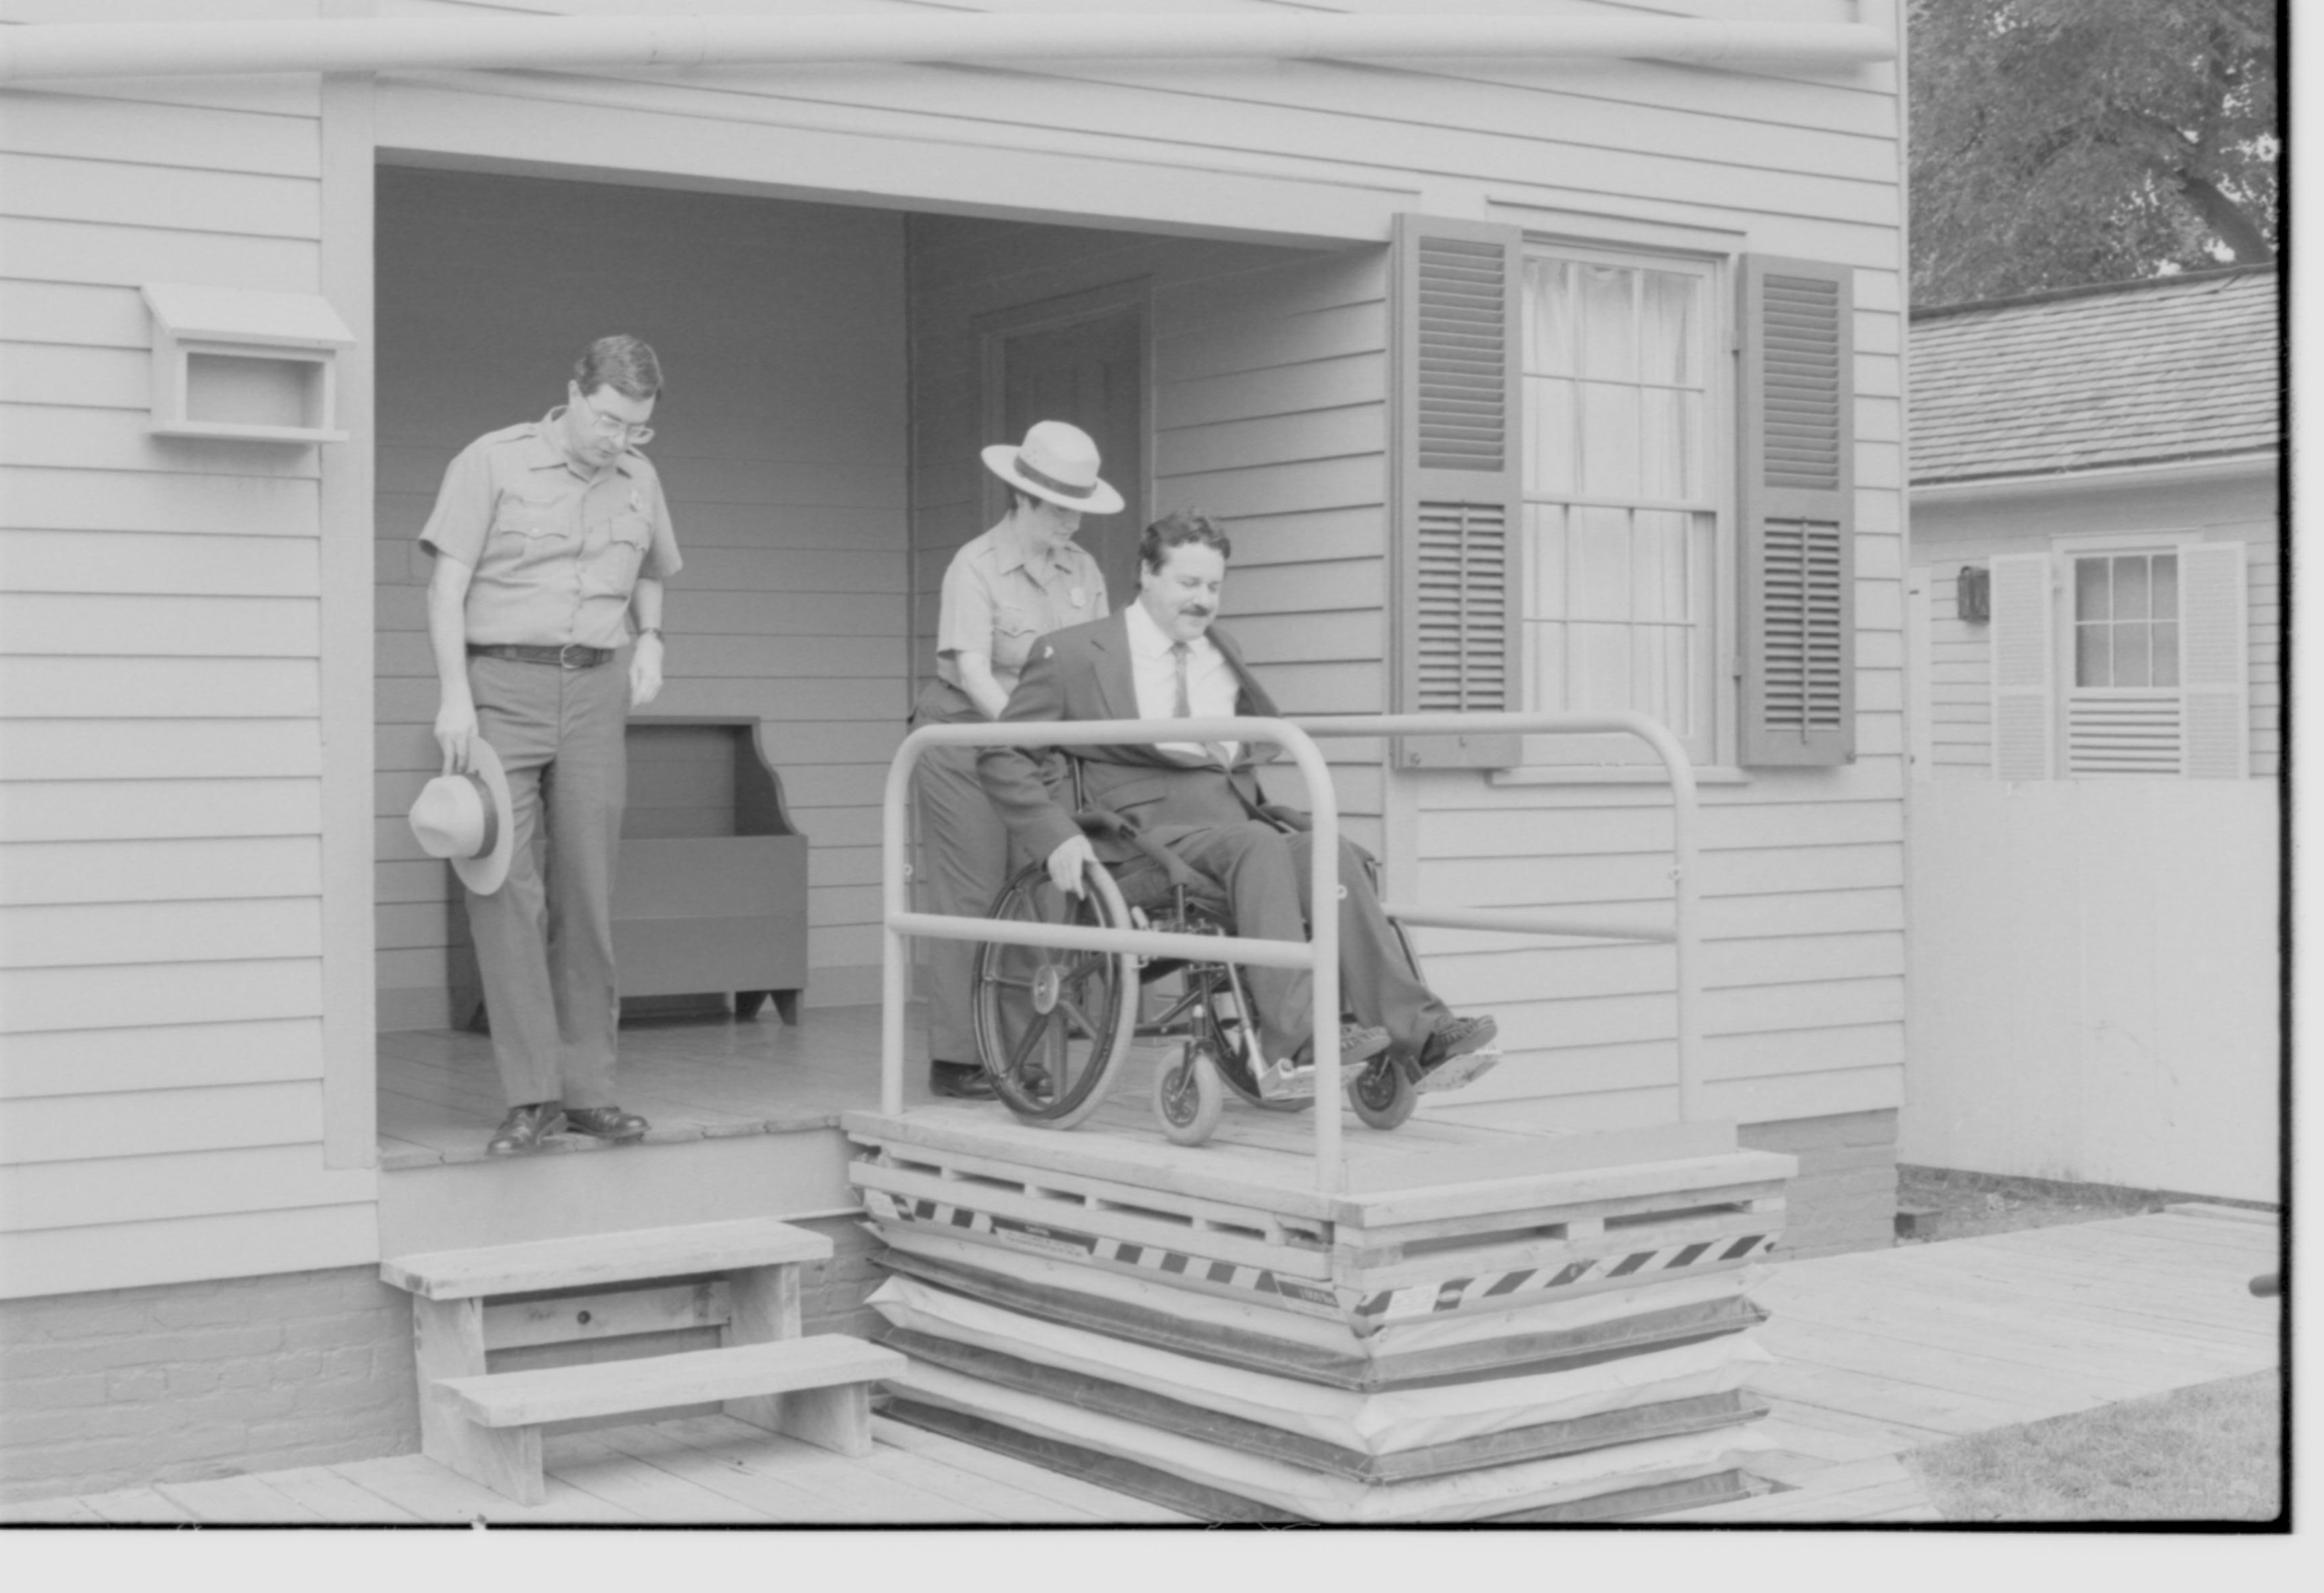 Lincoln Home wheelchair lift fully extended. One man in wheelchair entering lift. Staff member Judith Winkelmann on back porch assistimg wheelchair onto lift. Superintendent Norman Hellmers on left of photo, on porch. Corneau house in background. Photographer facing north west.